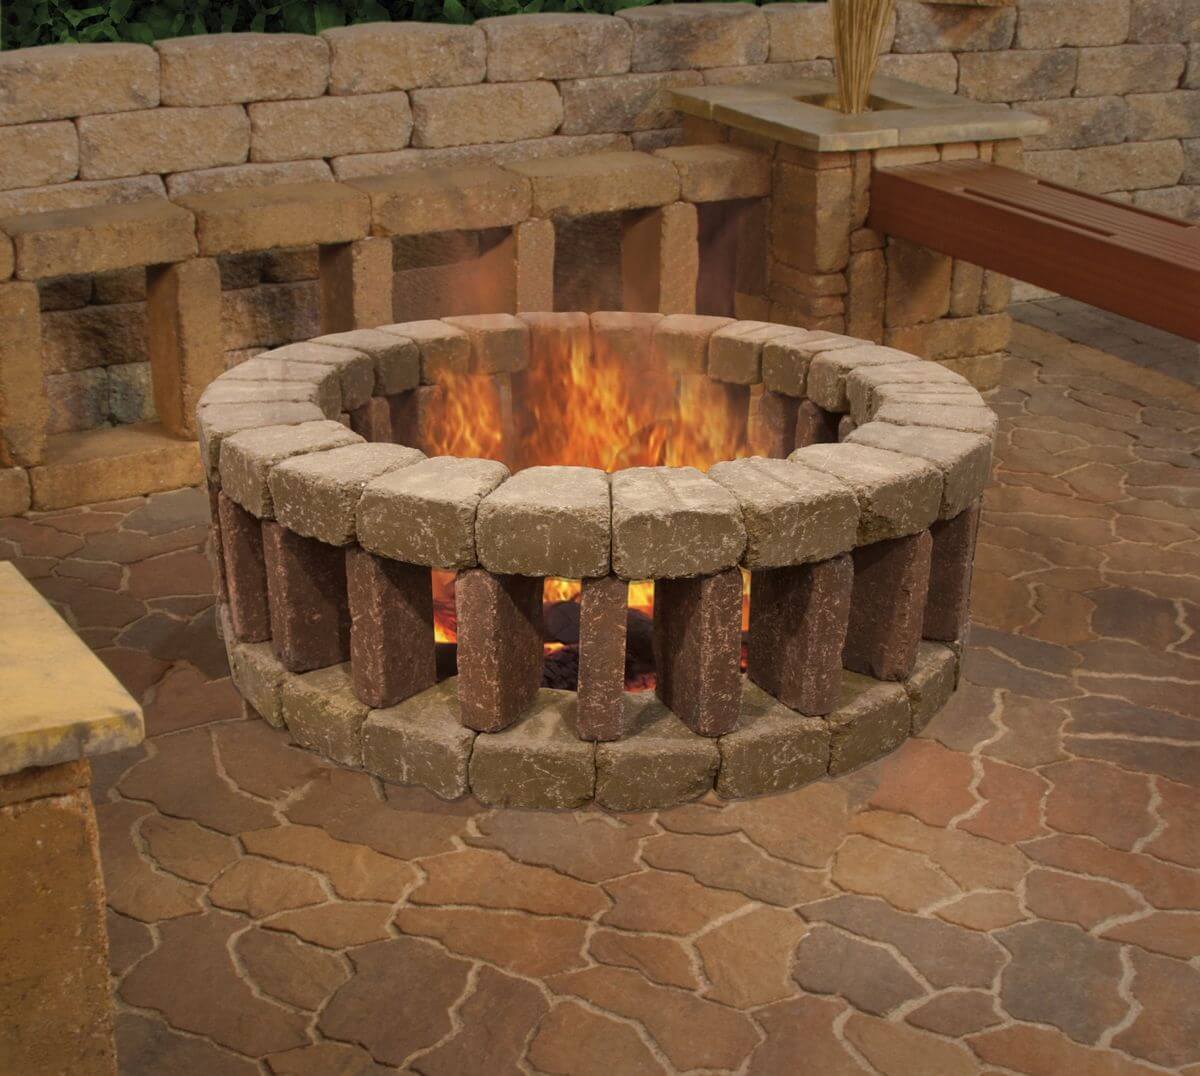 How To Build A Brick Fire Pit Without Mortar - Consort Design